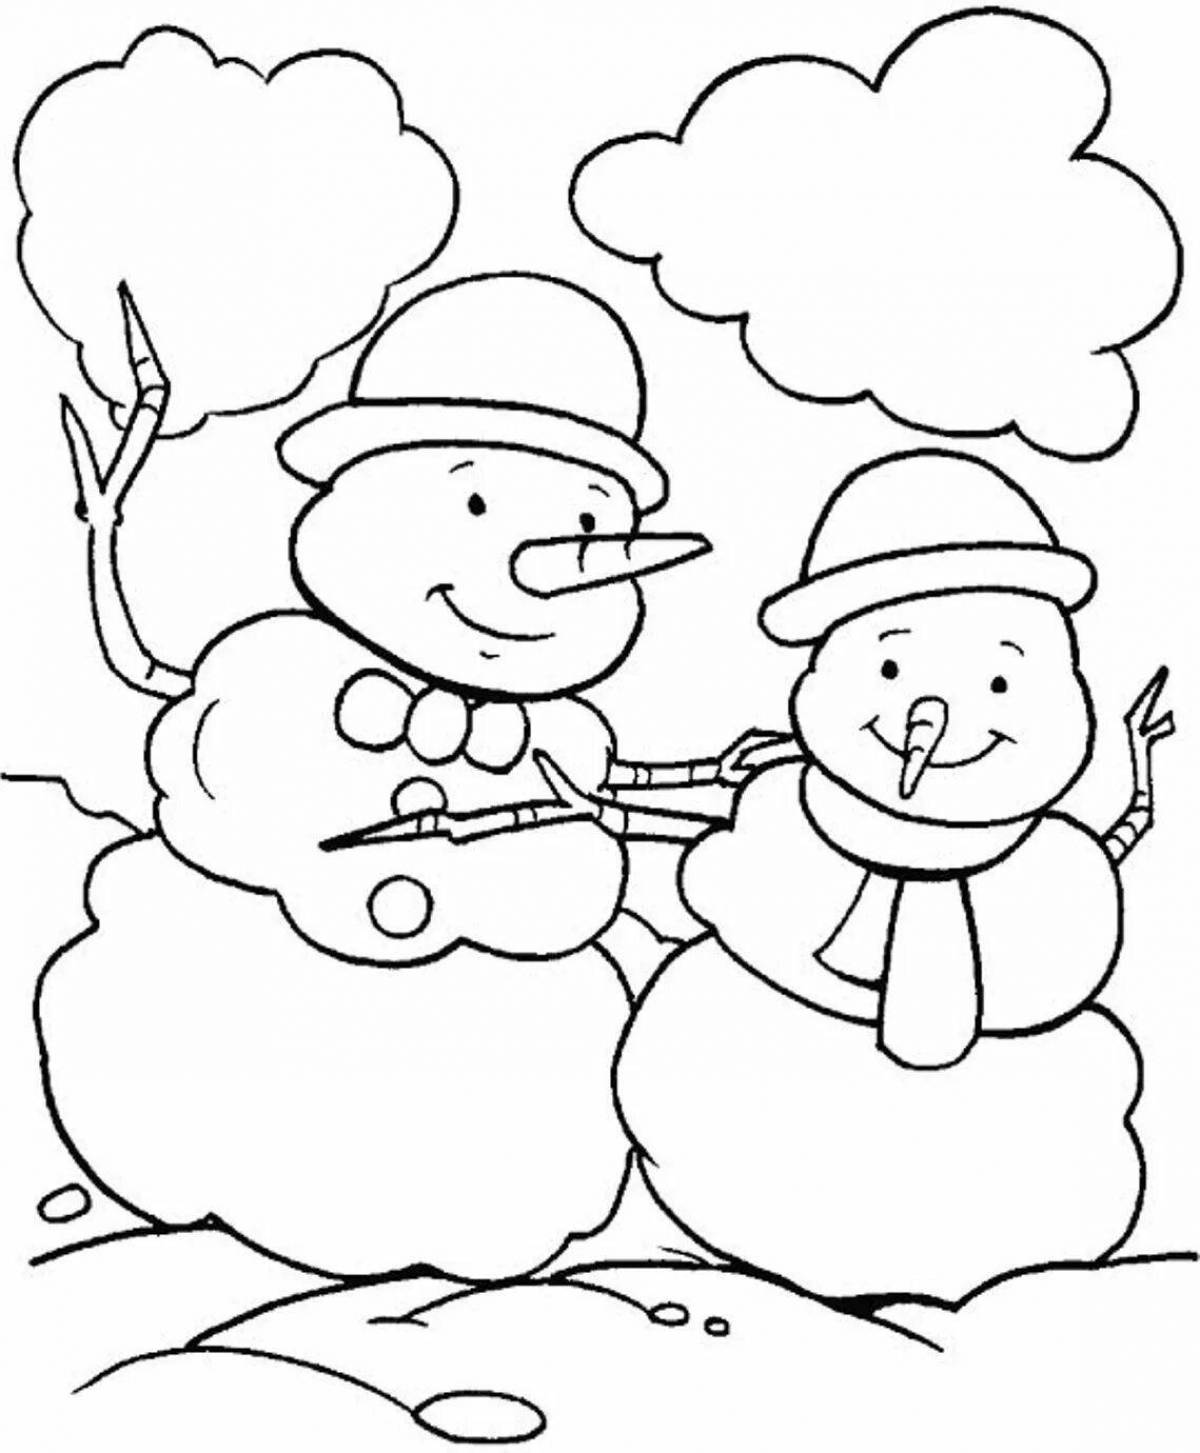 Exciting snowman drawing for kids